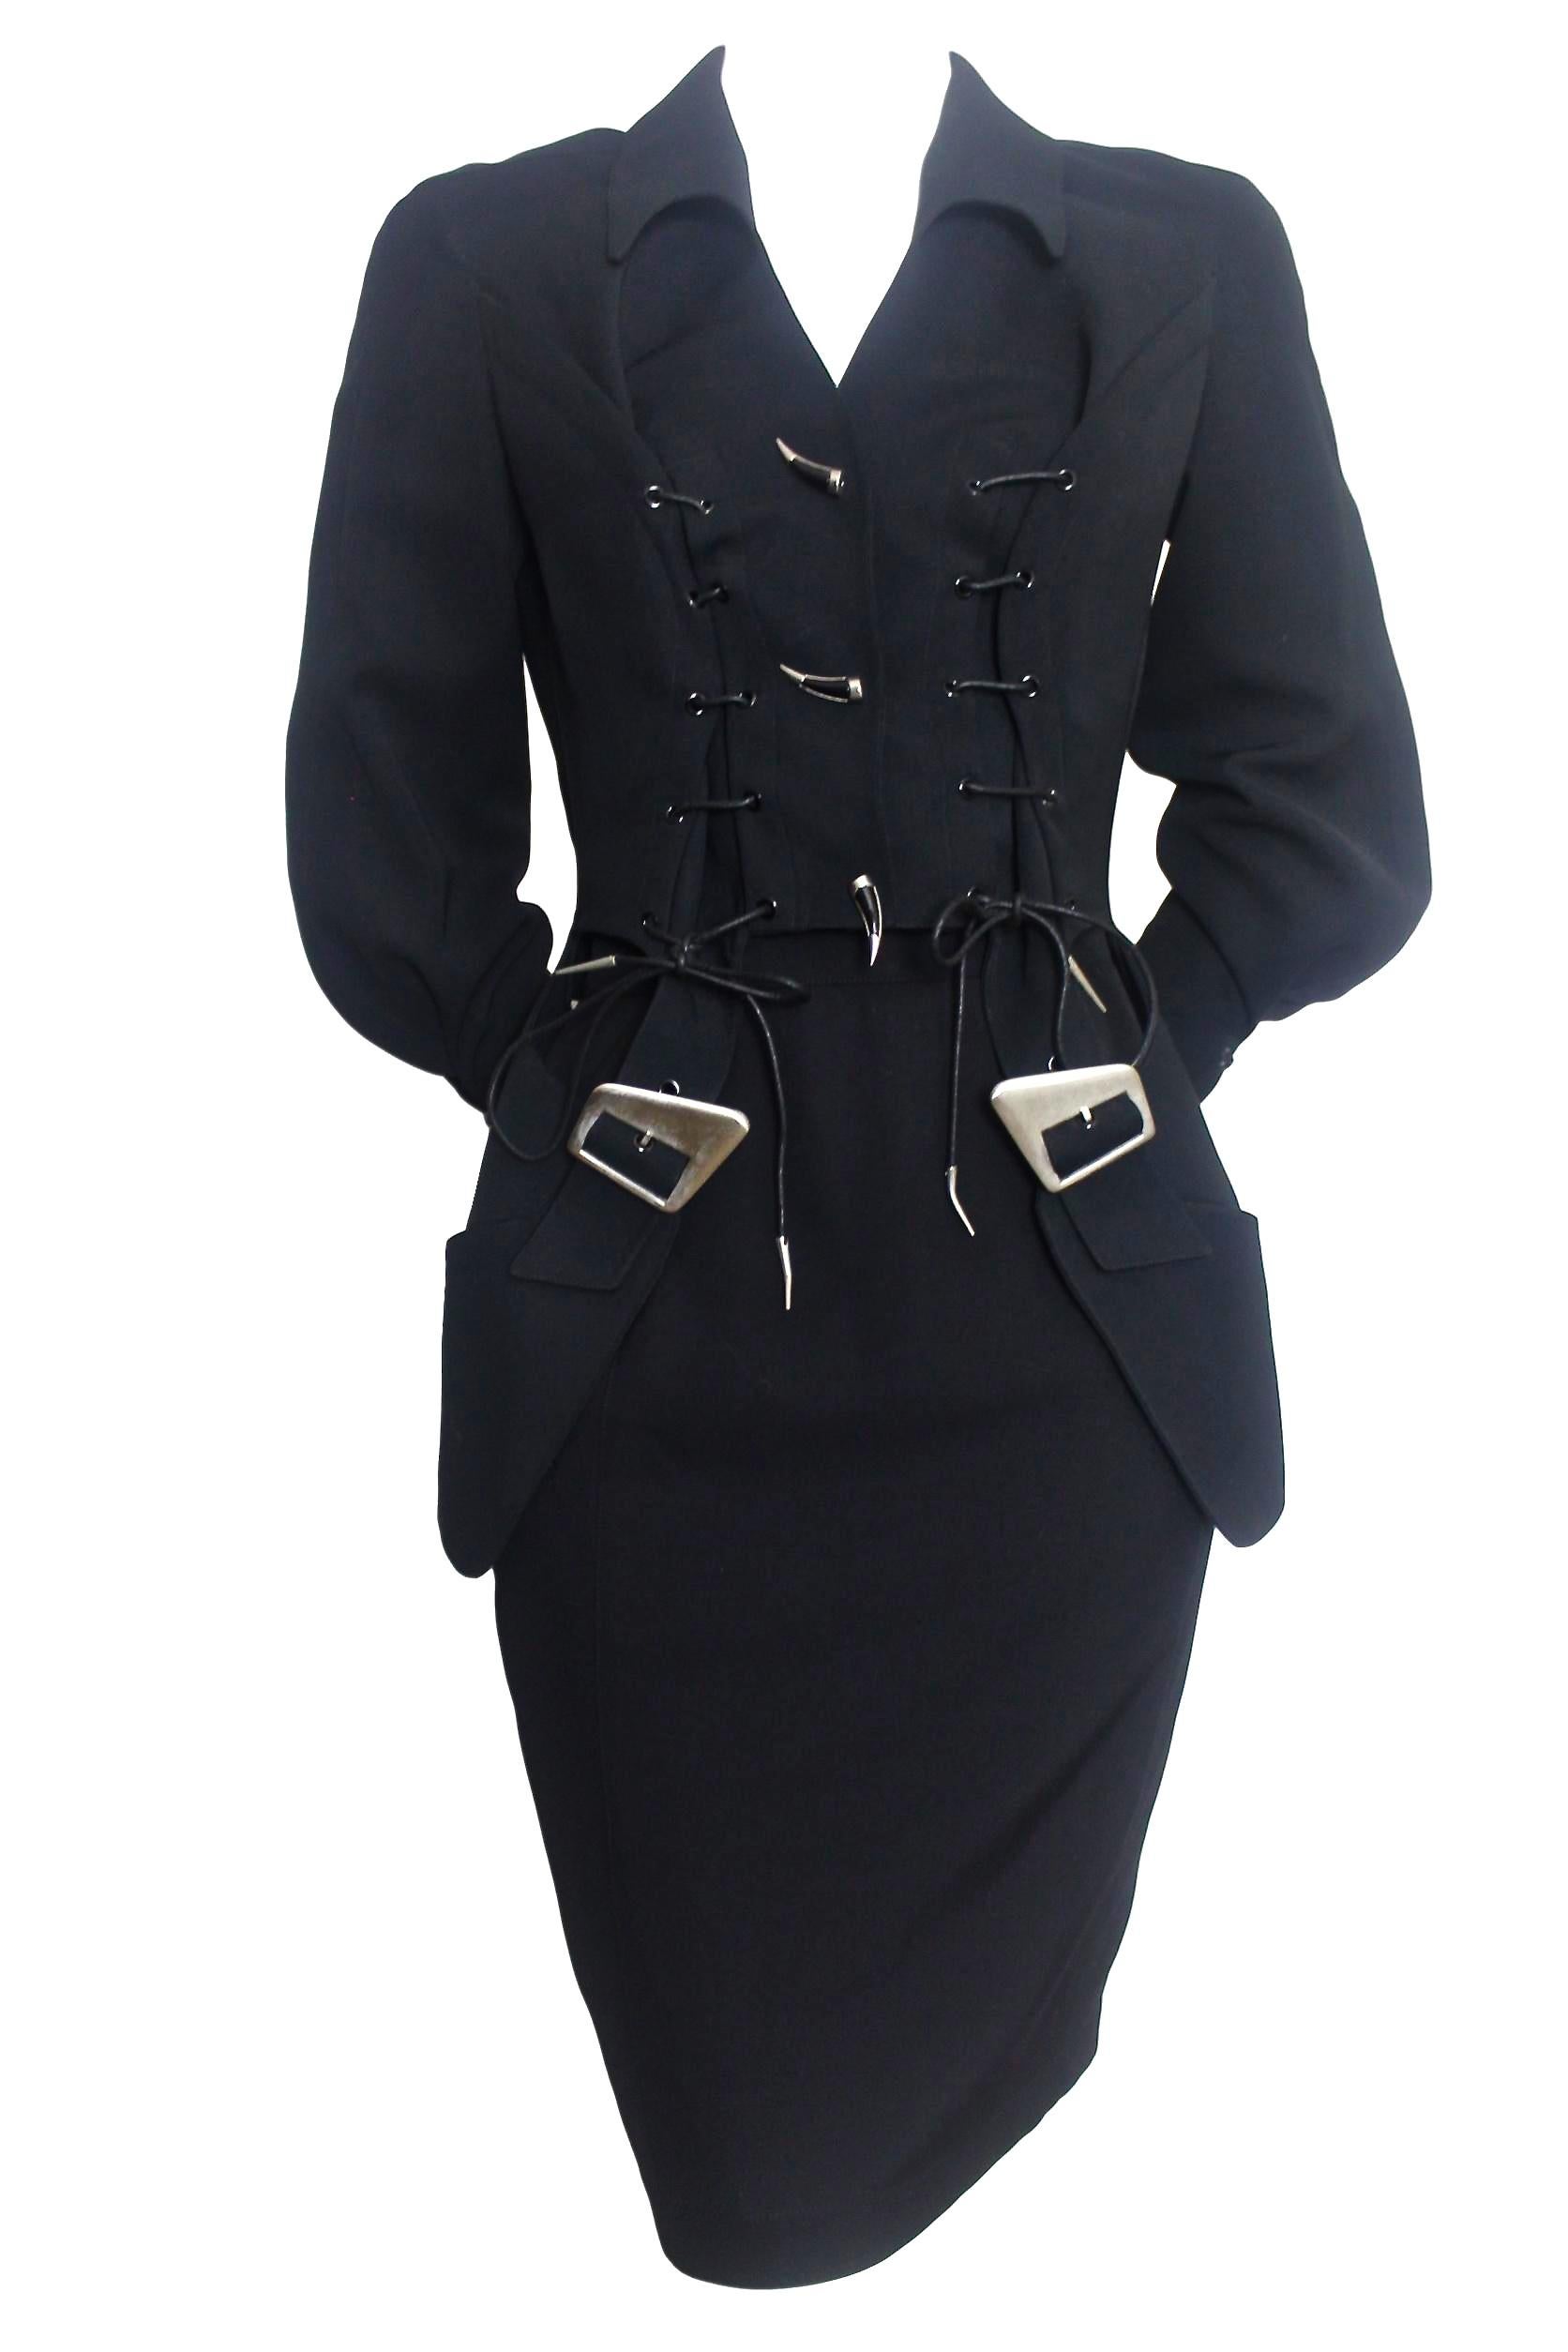 Thierry Mugler 1992 Runway Holster Jacket and Skirt For Sale 3